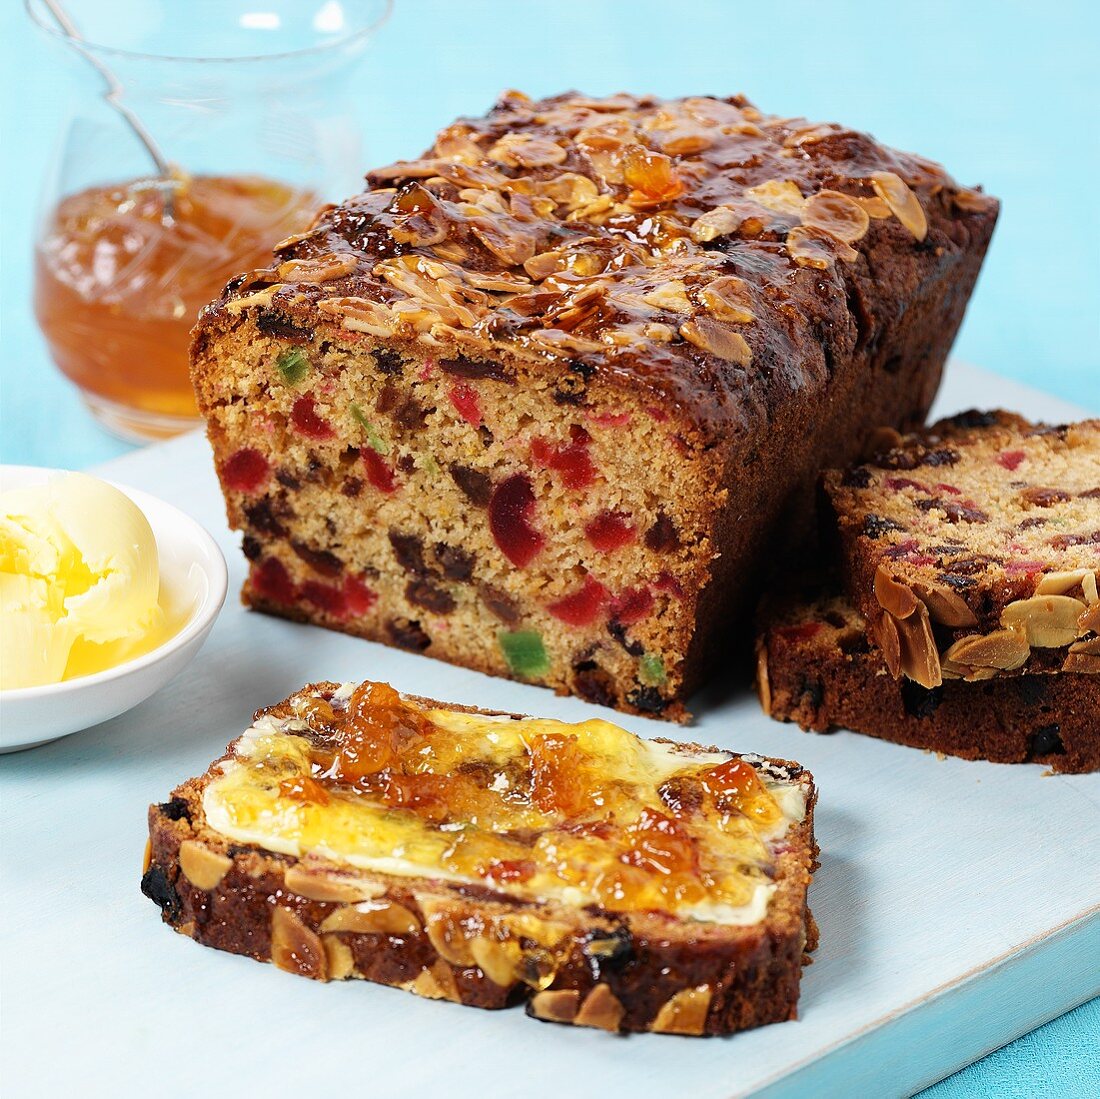 Fruit cake with butter and jam